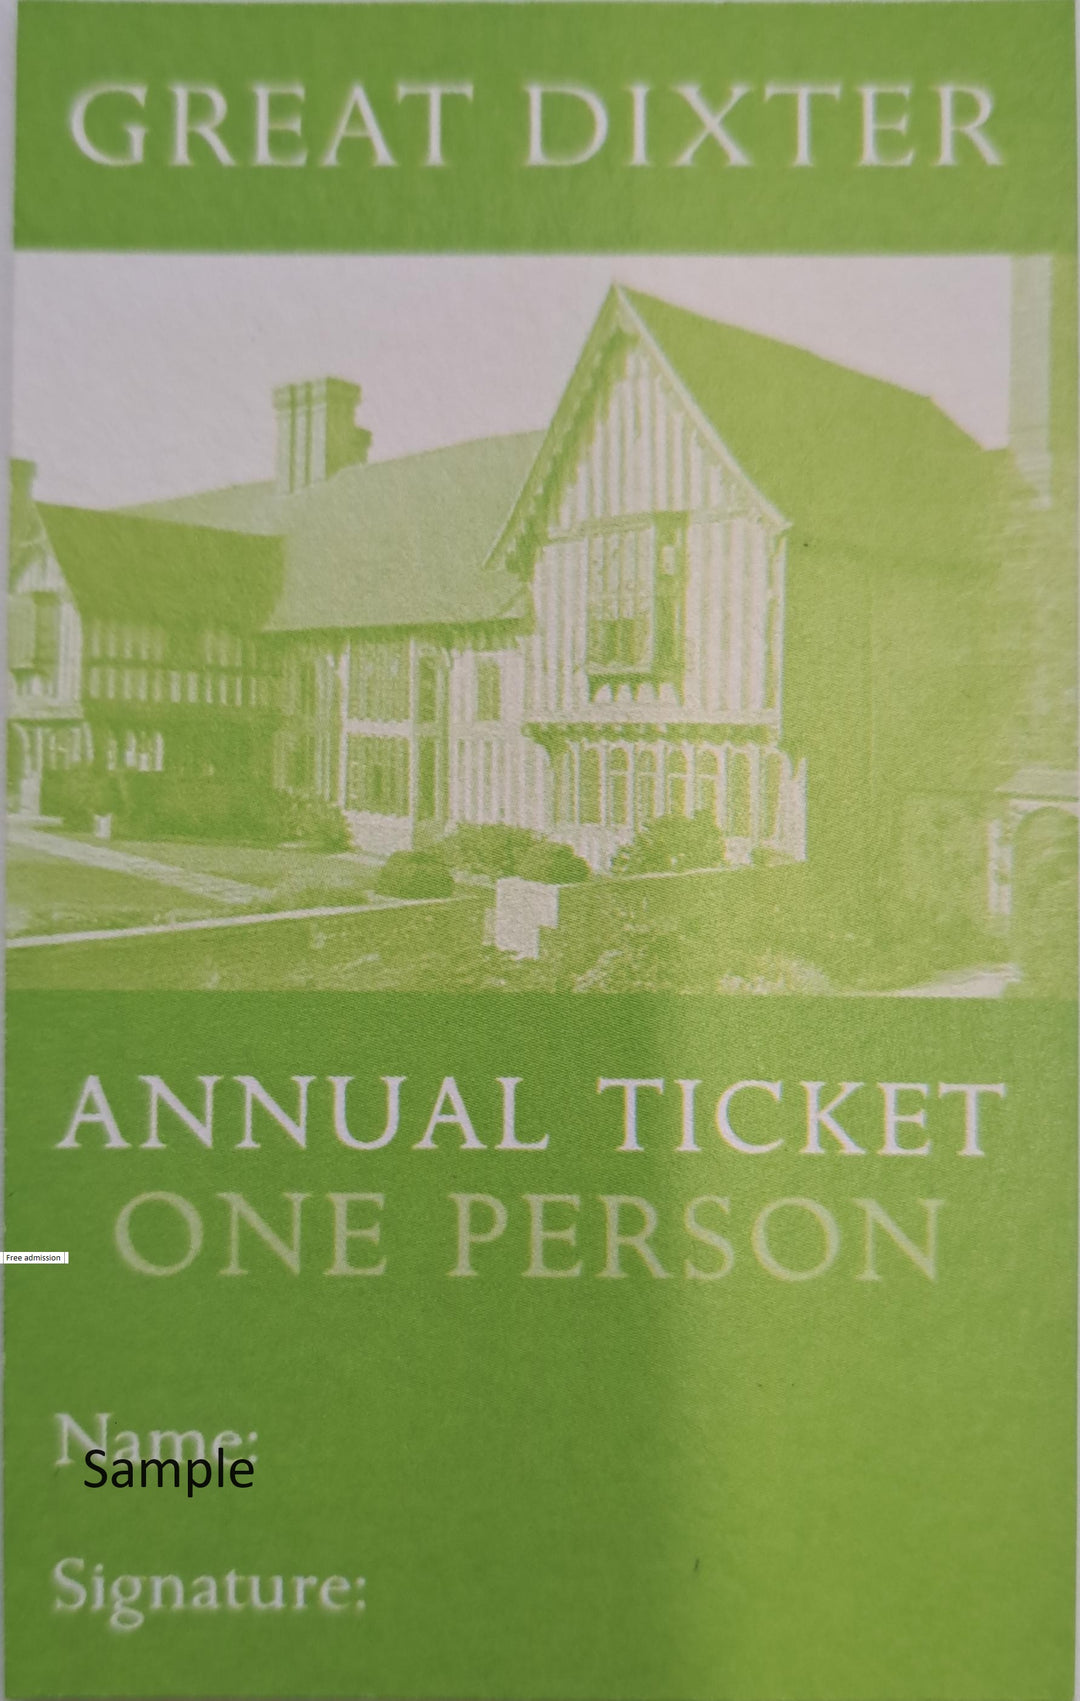 Annual Ticket 1 Person (purchase)